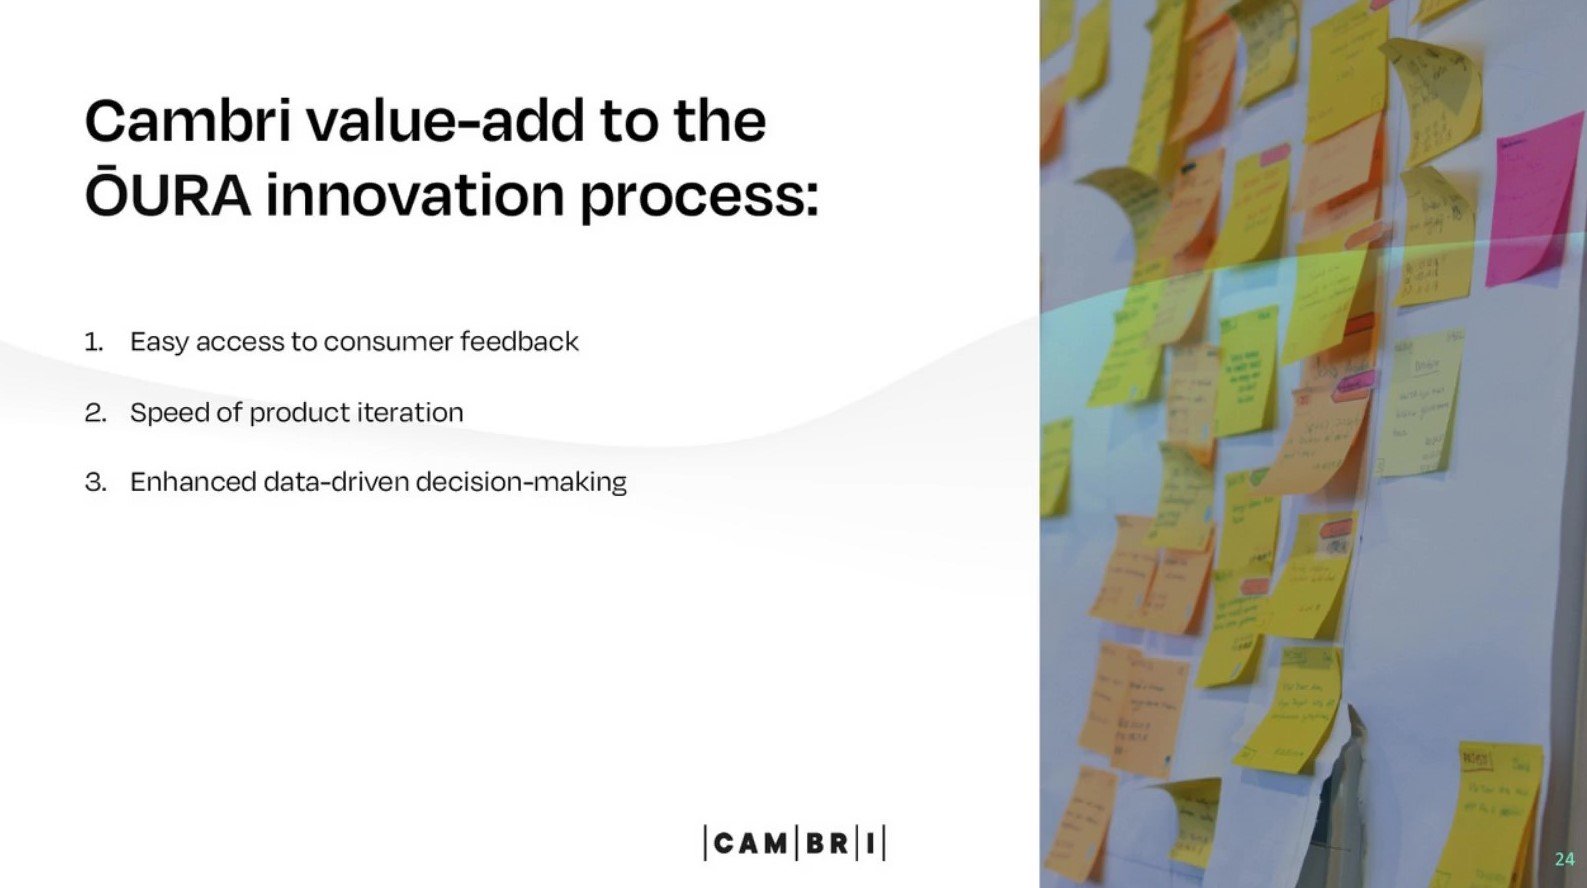 The value Cambri adds to Oura's innovation process